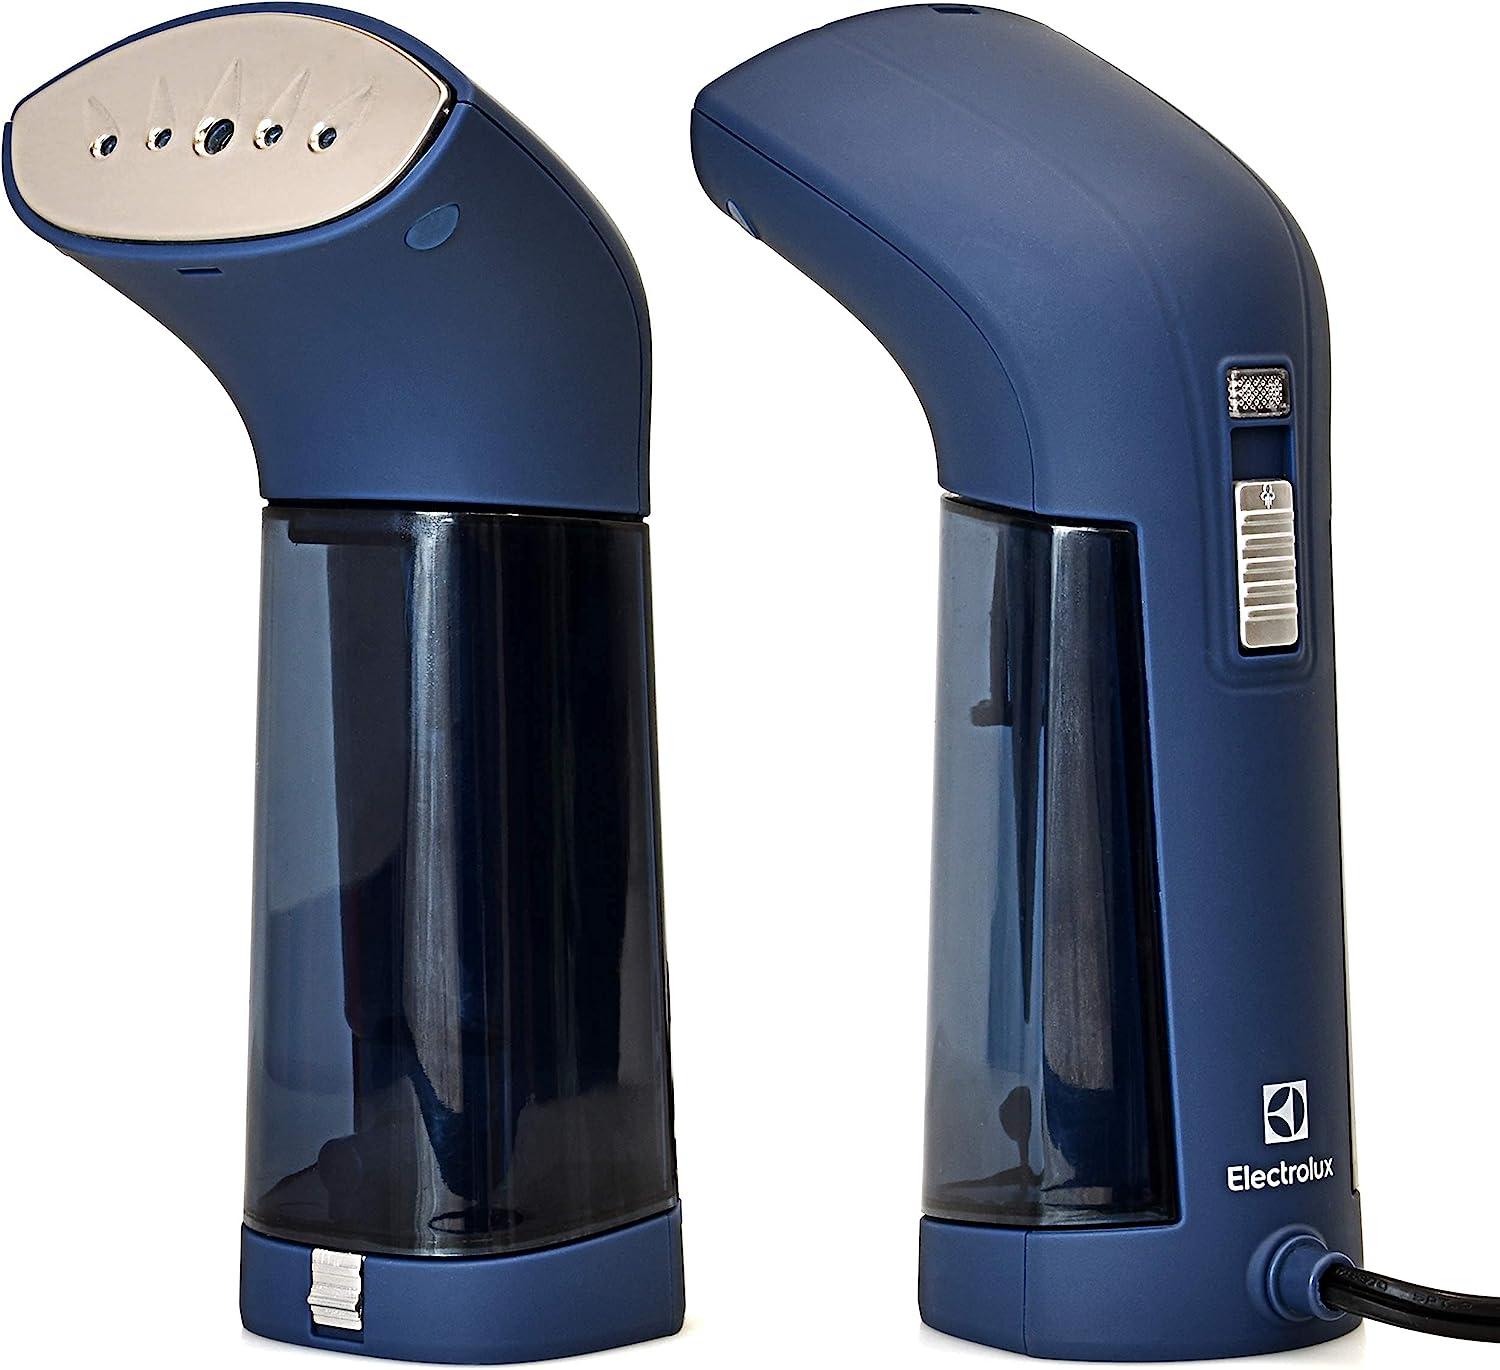 Electrolux Compact Handheld Travel Garment and Fabric Steamer for $27.95 Shipped